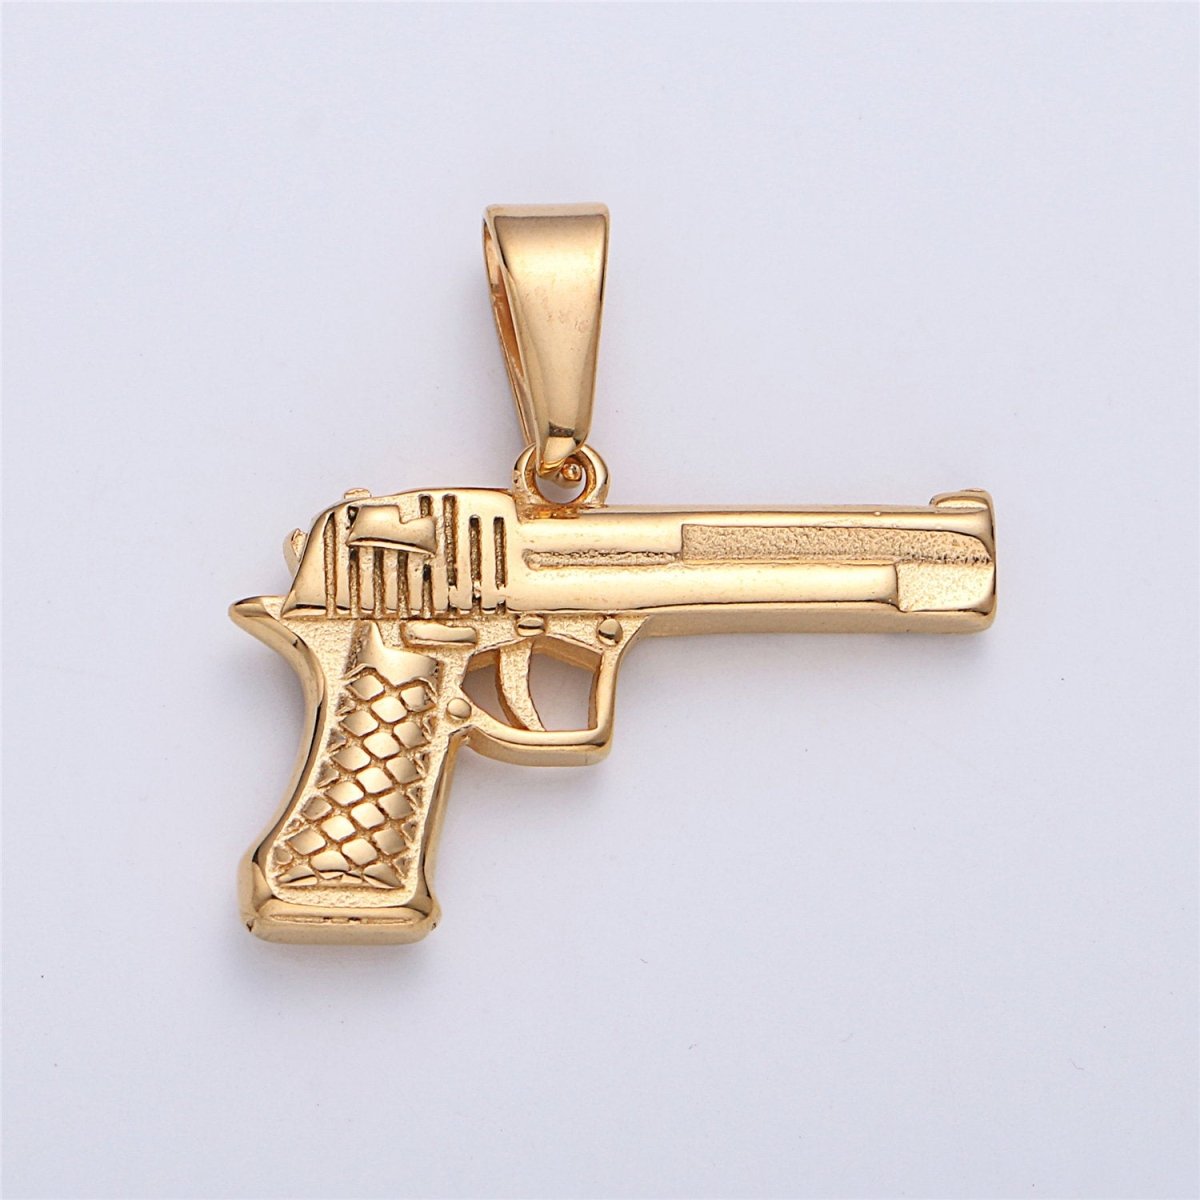 Gold Filled Pistol Charm Silver Gun Pendant for Earring Necklace Jewelry Making Supplies 30mmx30mm J-673 - DLUXCA